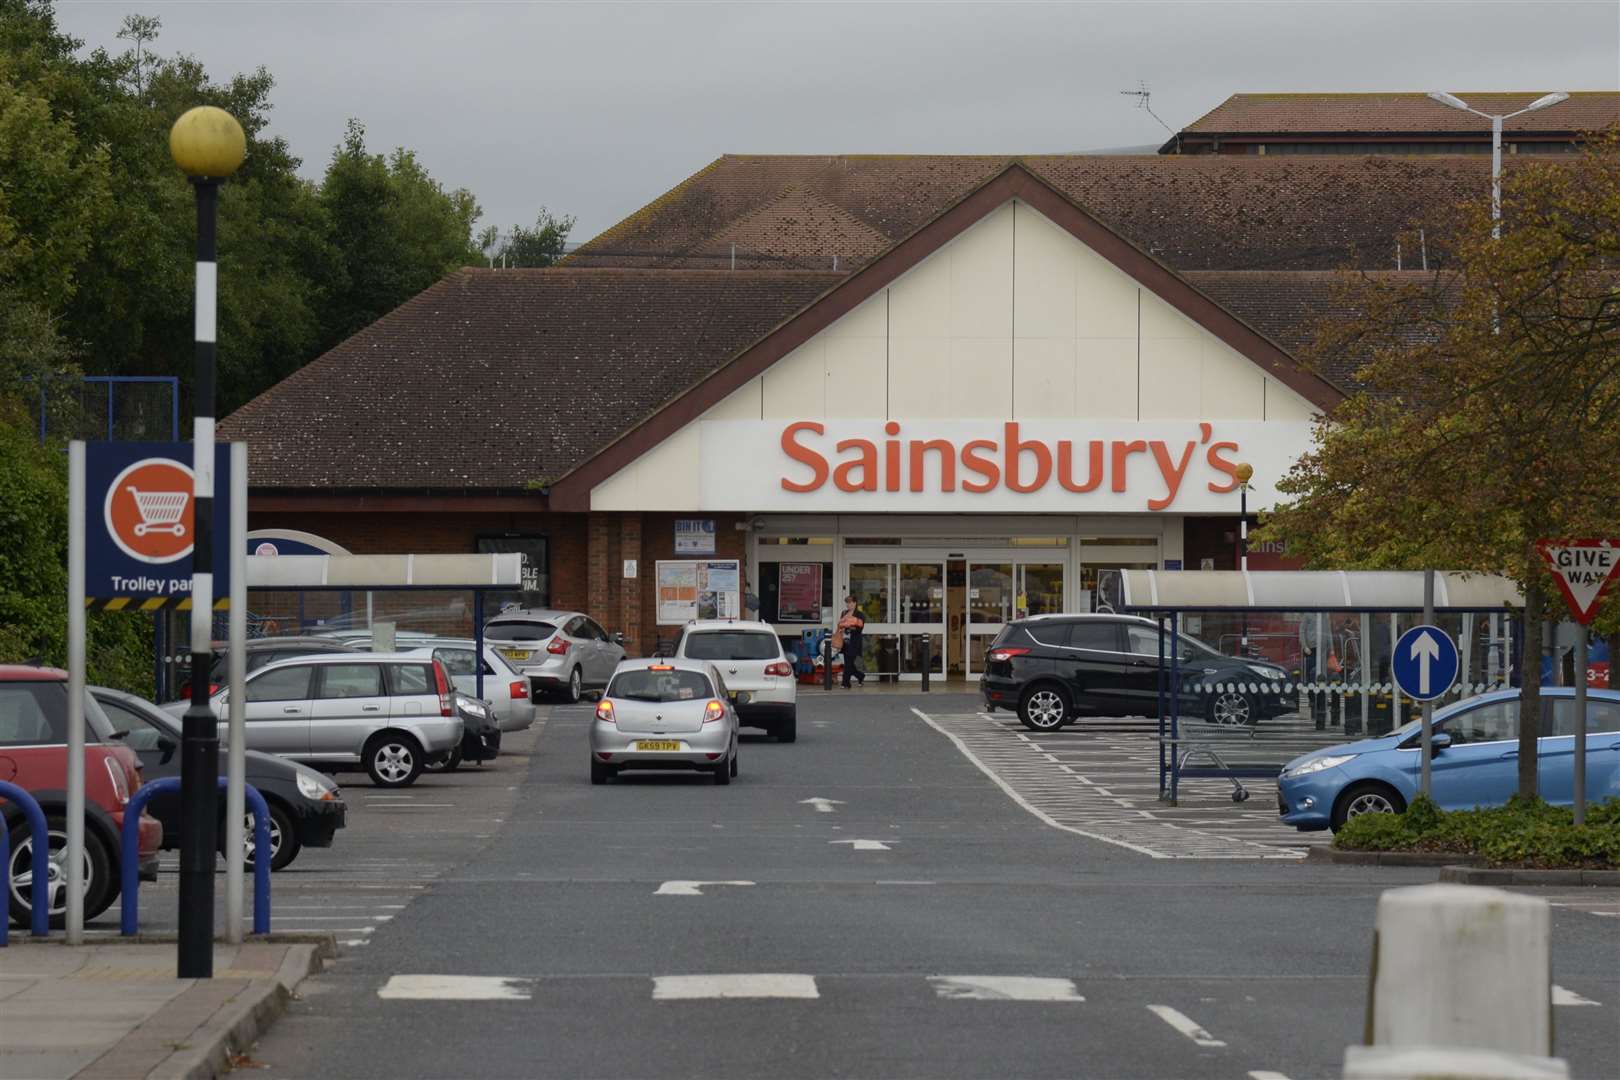 Sainsbury's Christmas opening hours differ depending on the store